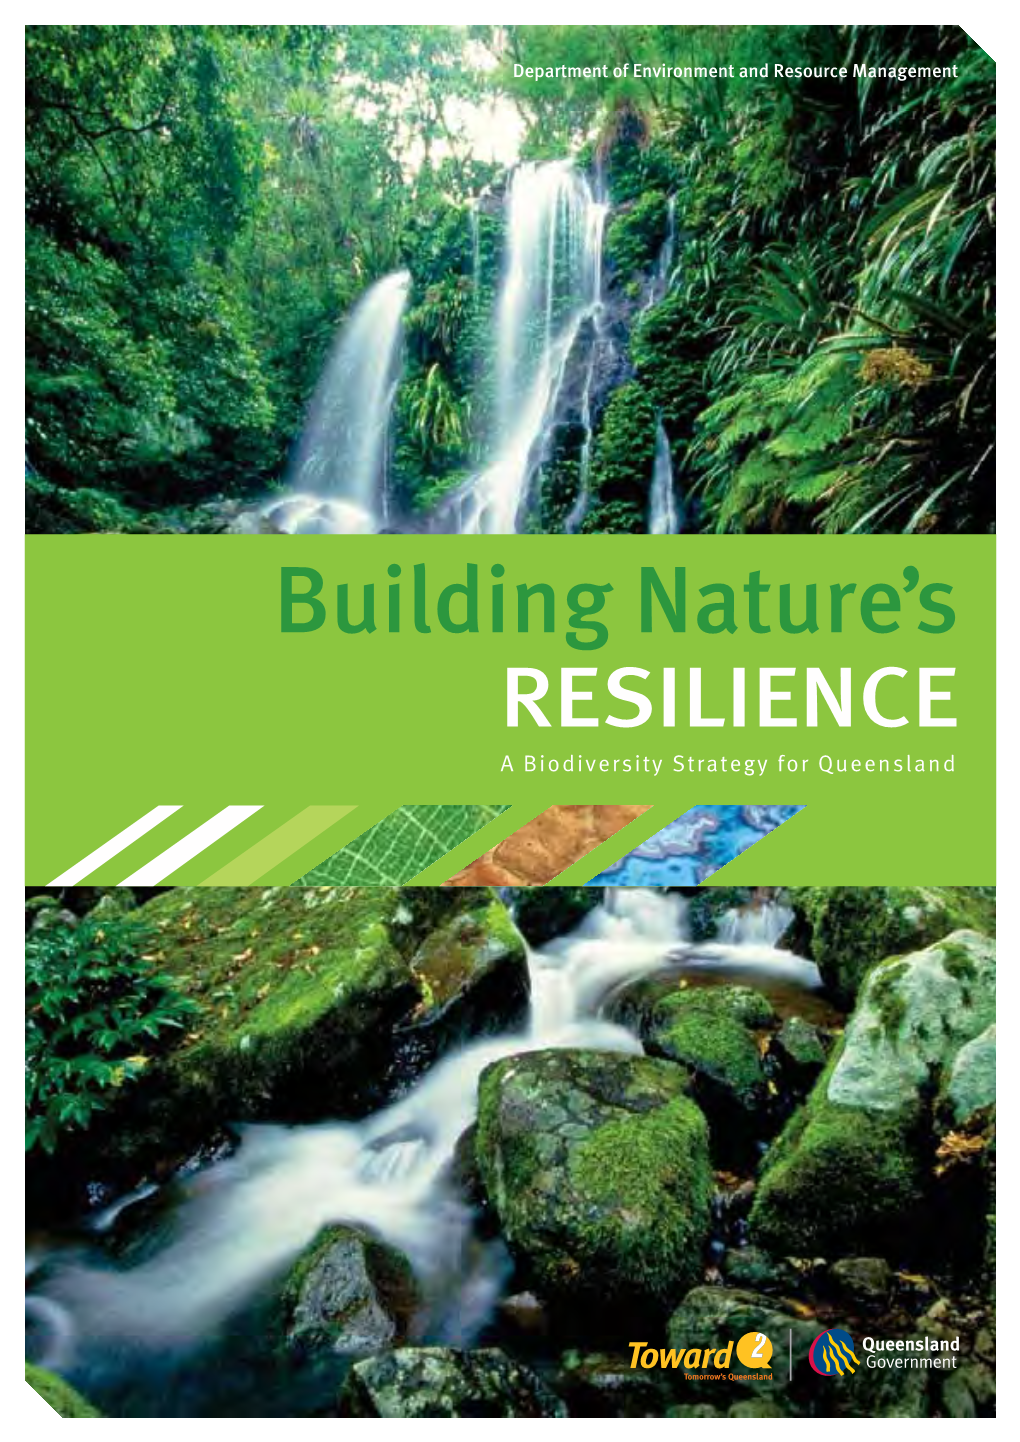 State of Queensland (Department of Environment and Resource Management) 2011